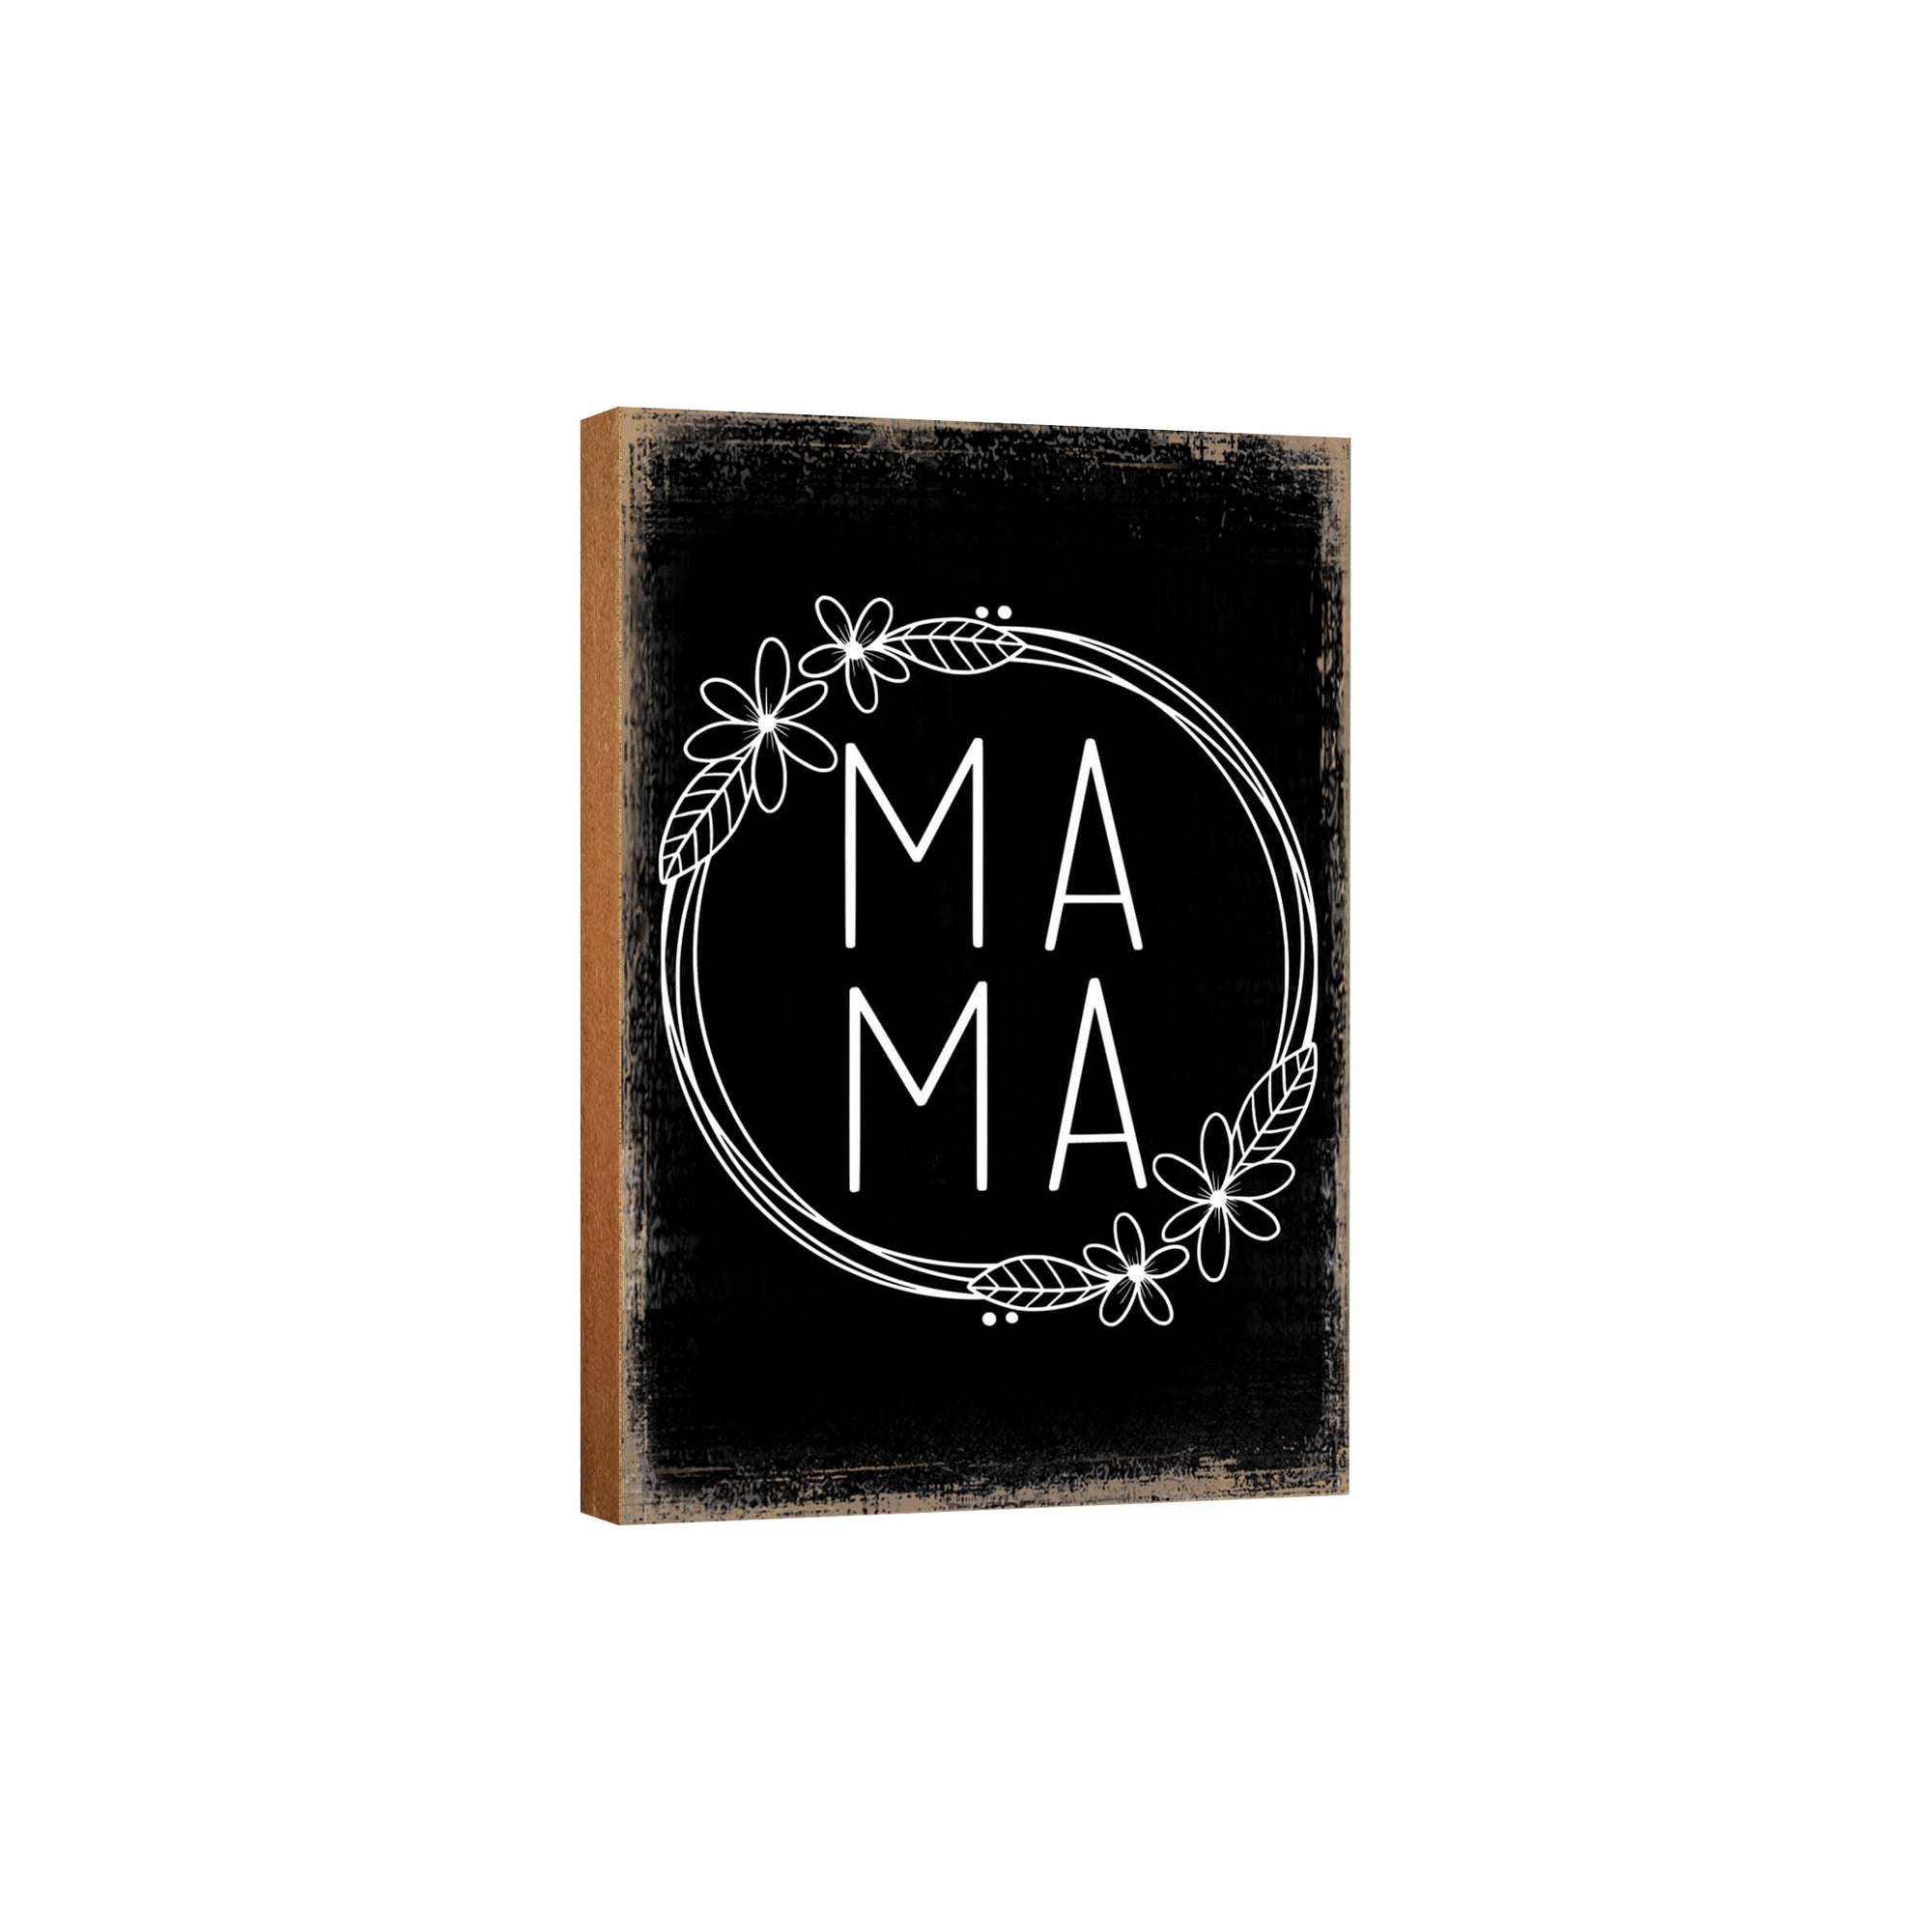 Shelf Décor Sign for Mother’s Day